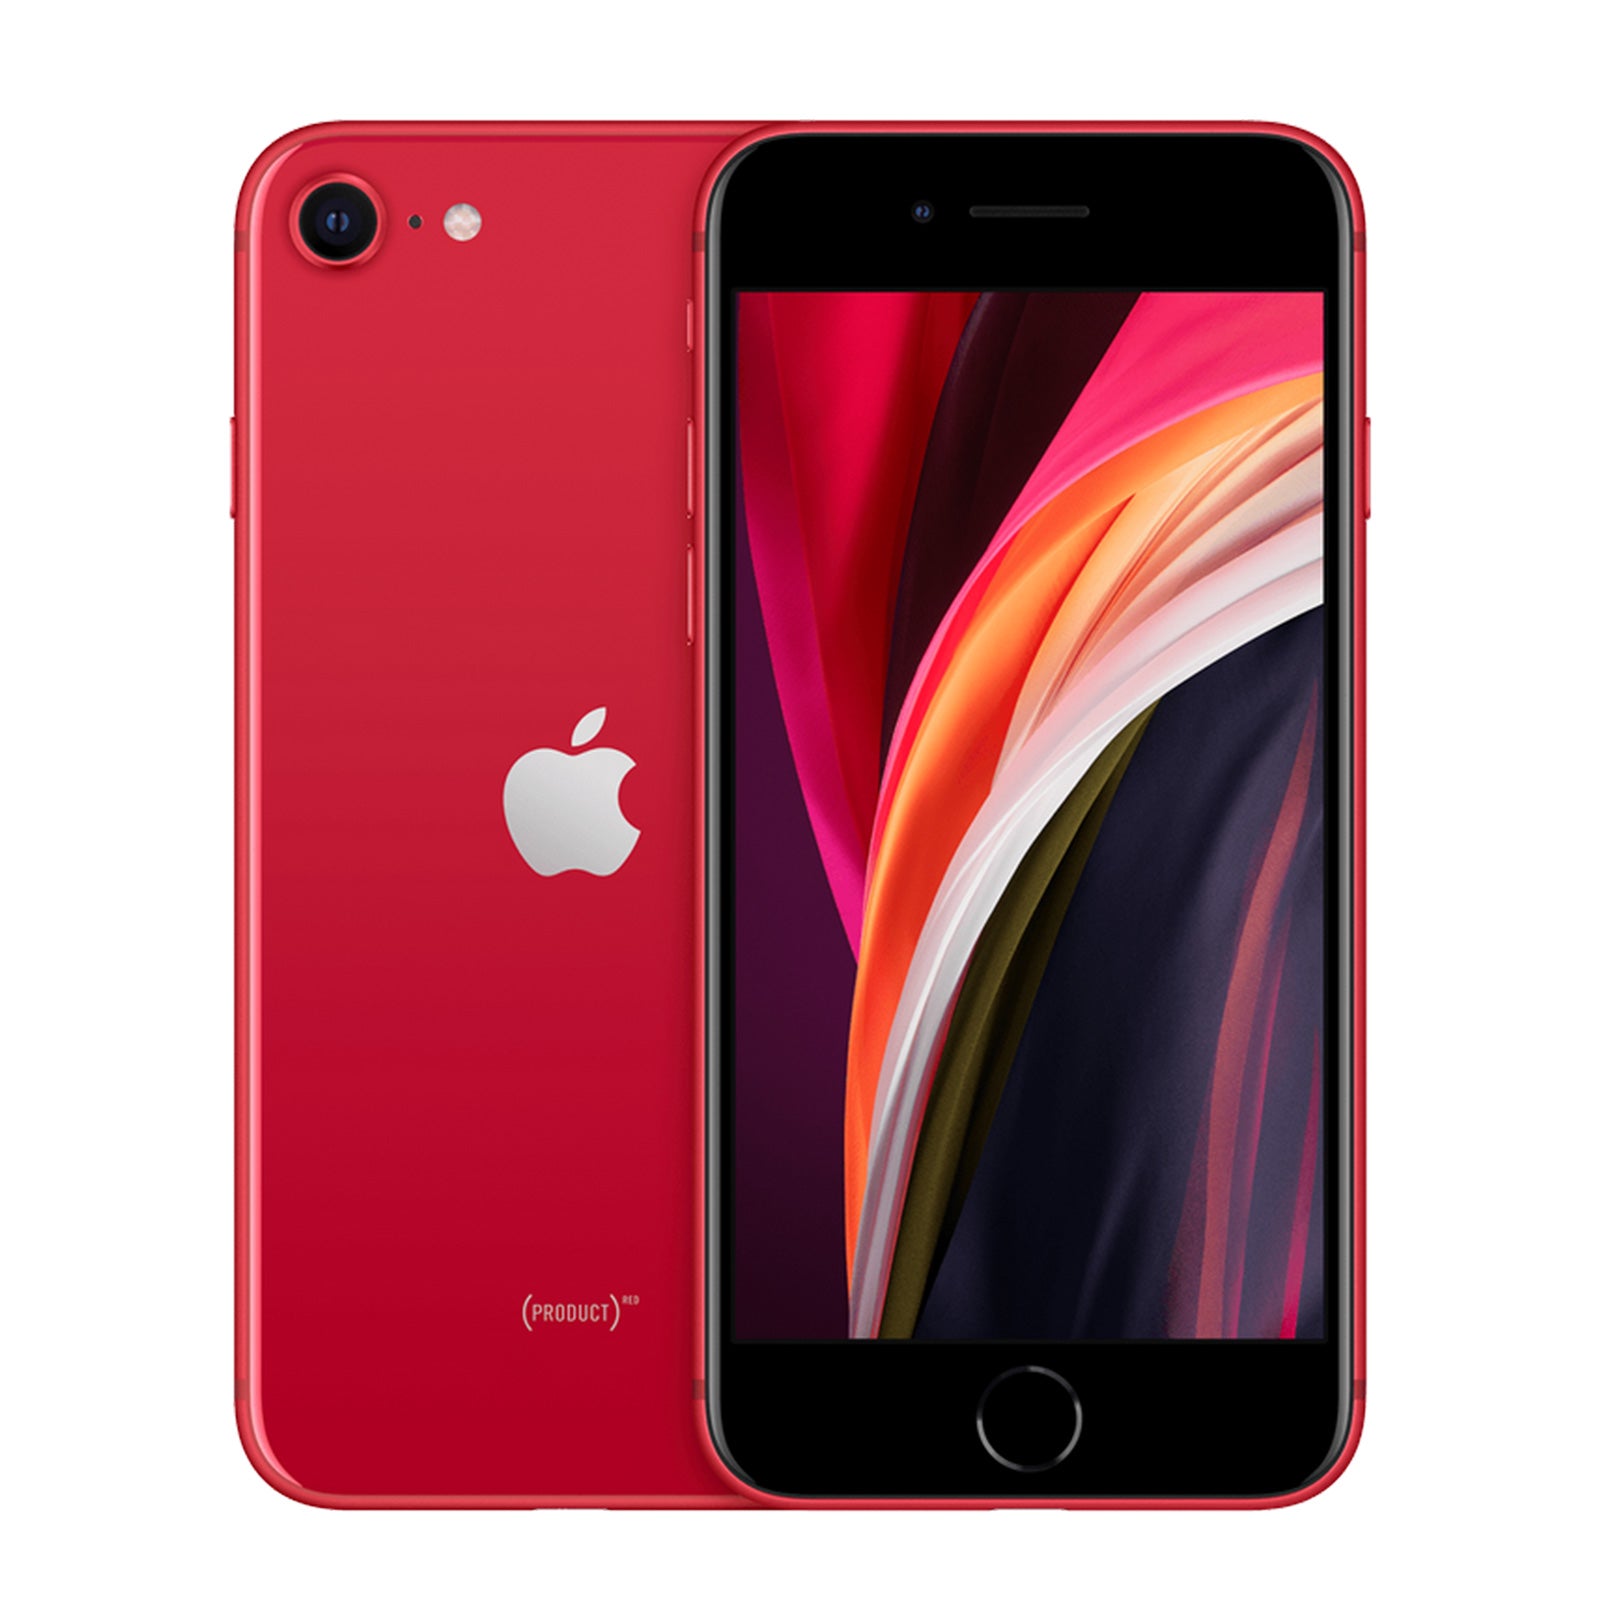 Apple iPhone SE 2nd Gen 256GB Product Red Fair AT&T